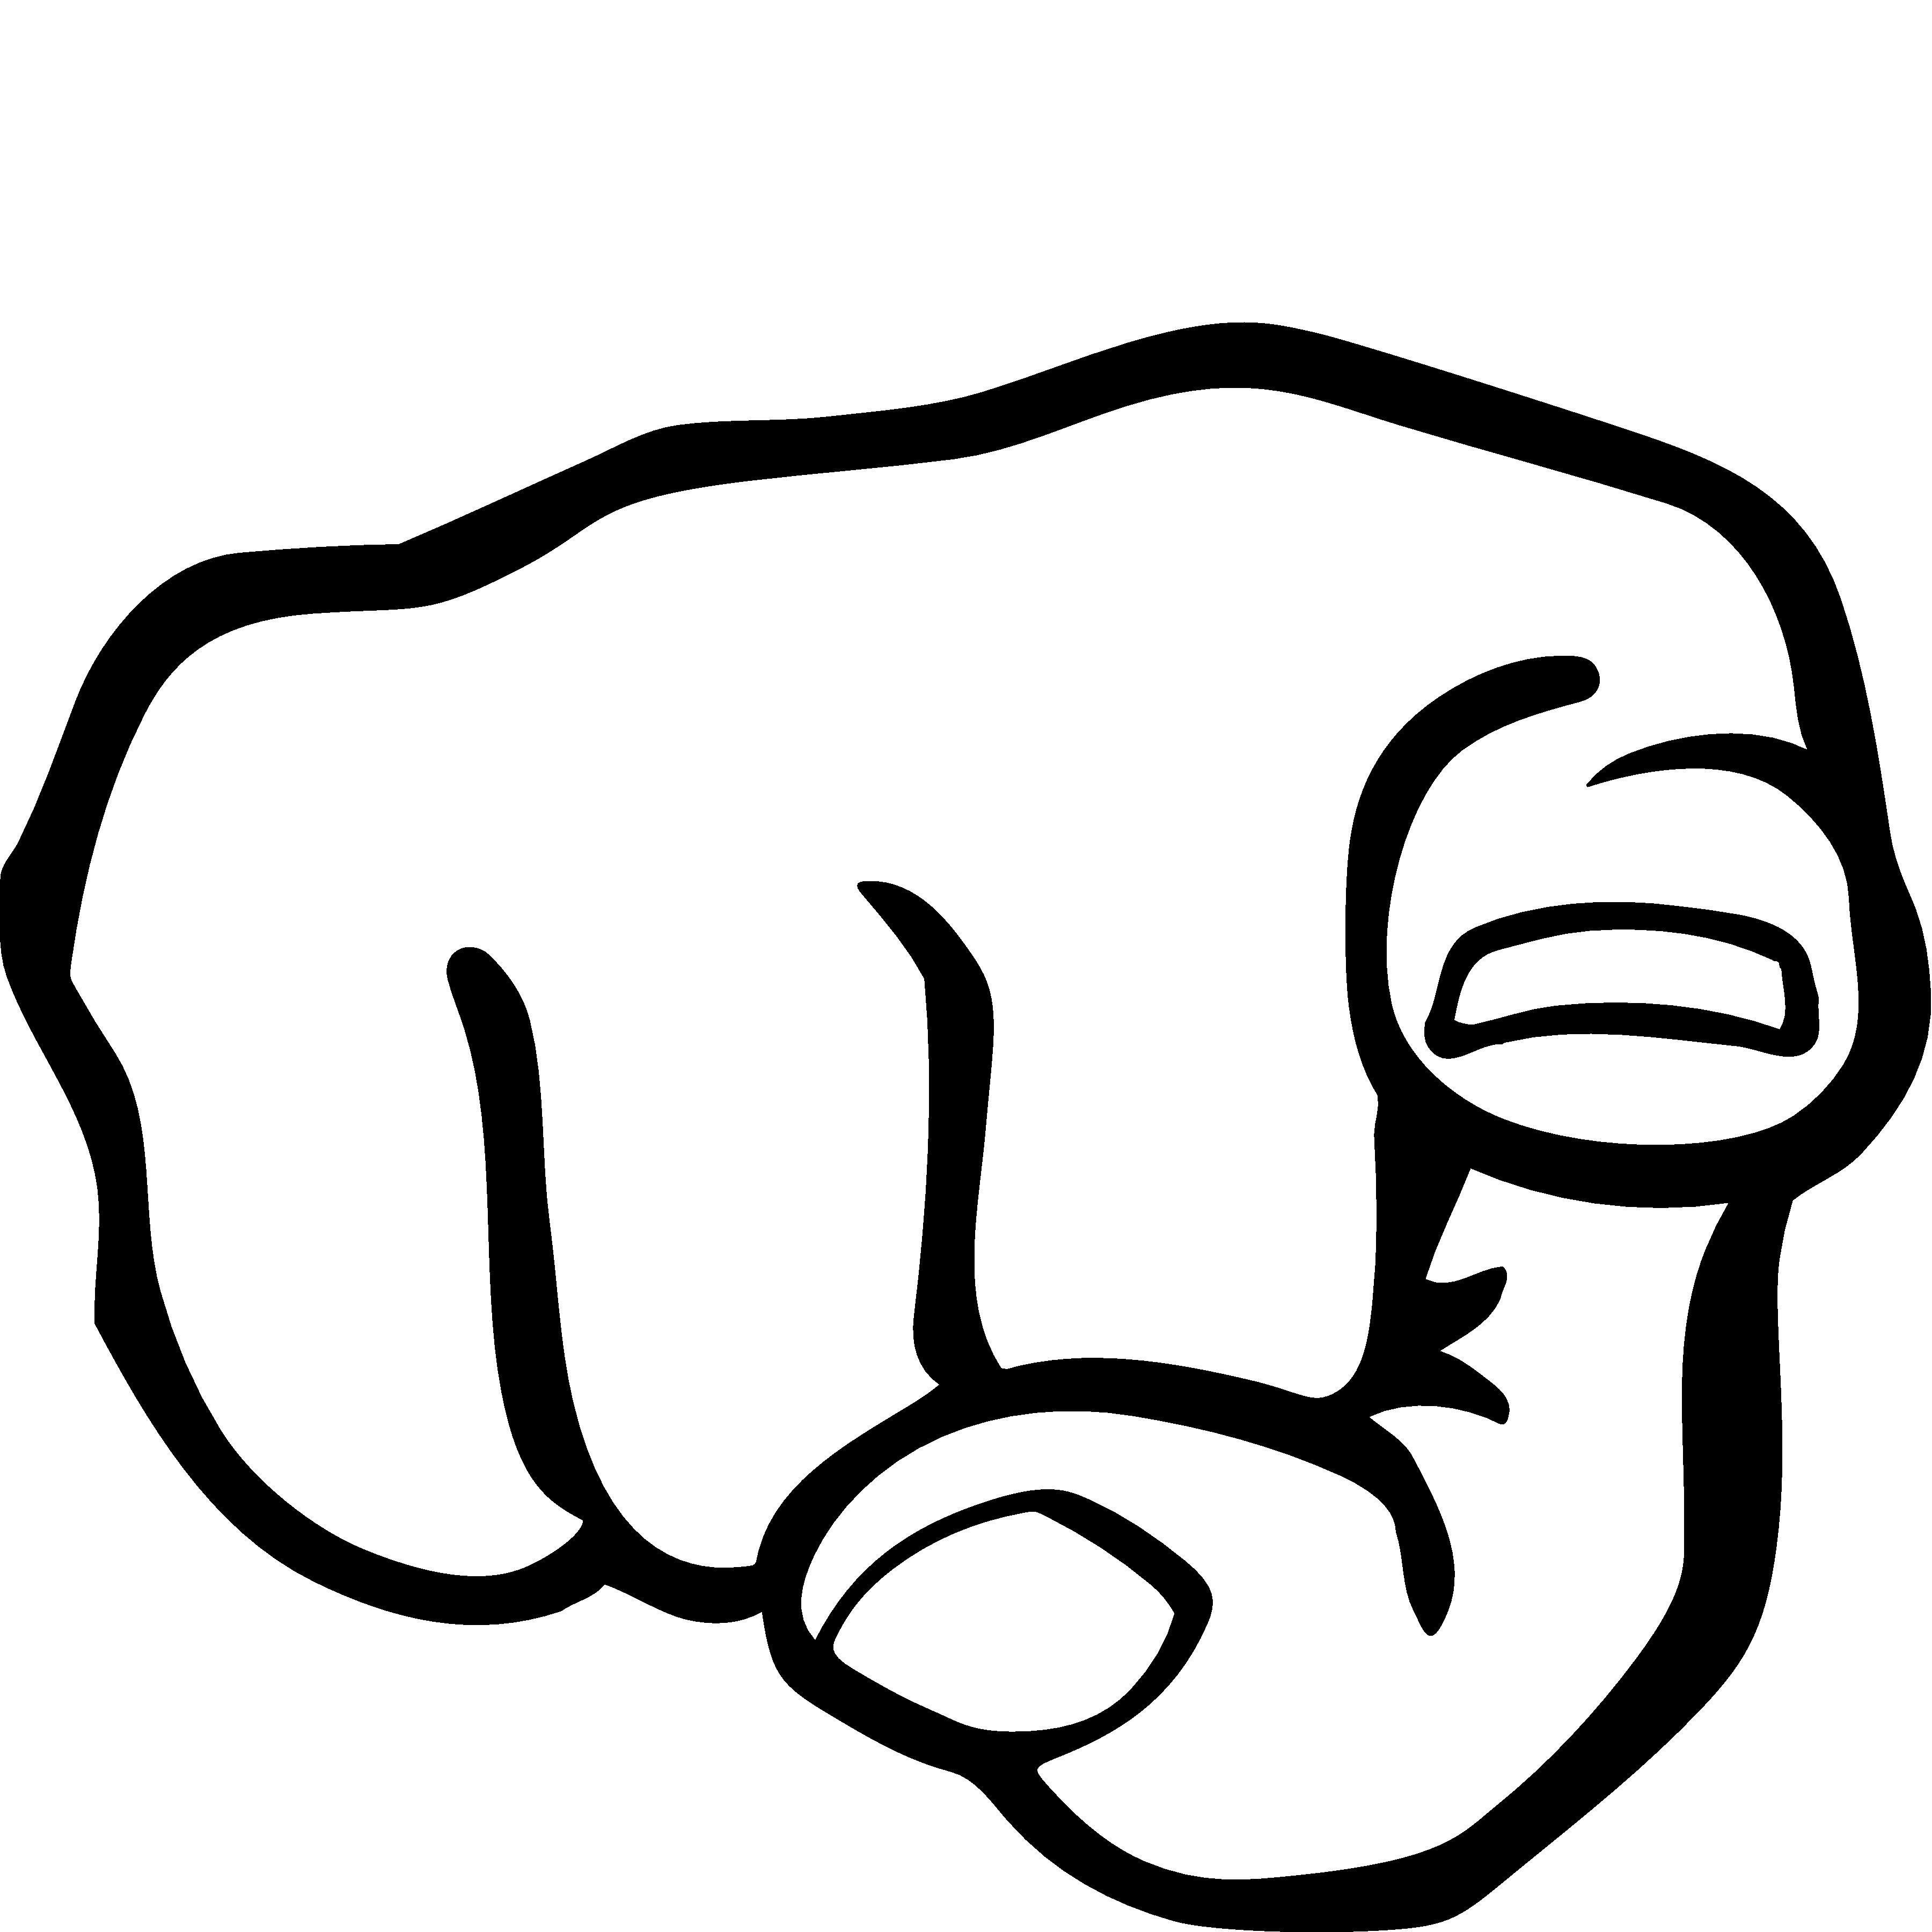 Finger Pointing Up - Clipart library